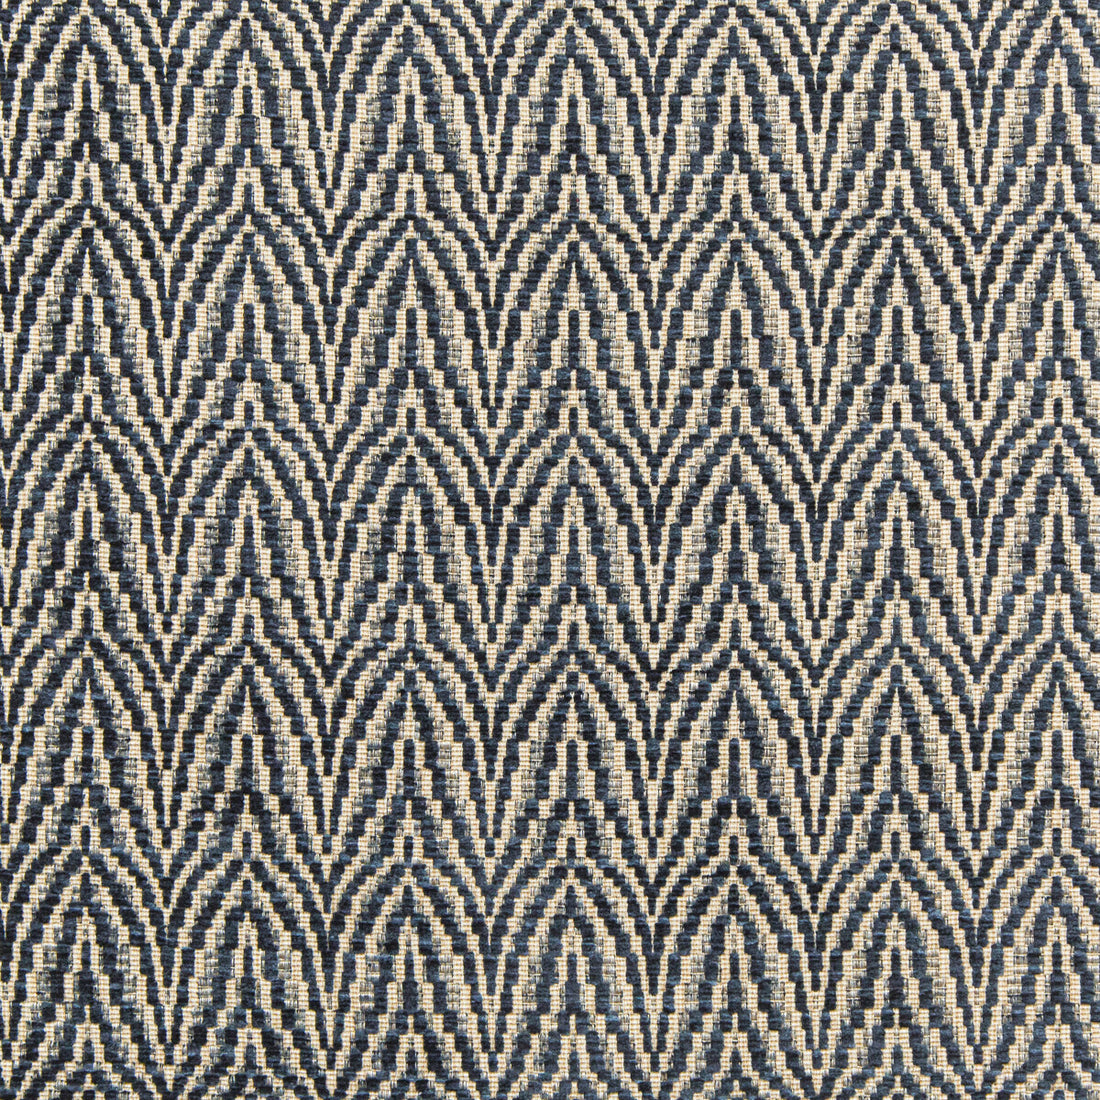 Blyth Weave fabric in slate color - pattern 2020108.511.0 - by Lee Jofa in the Linford Weaves collection